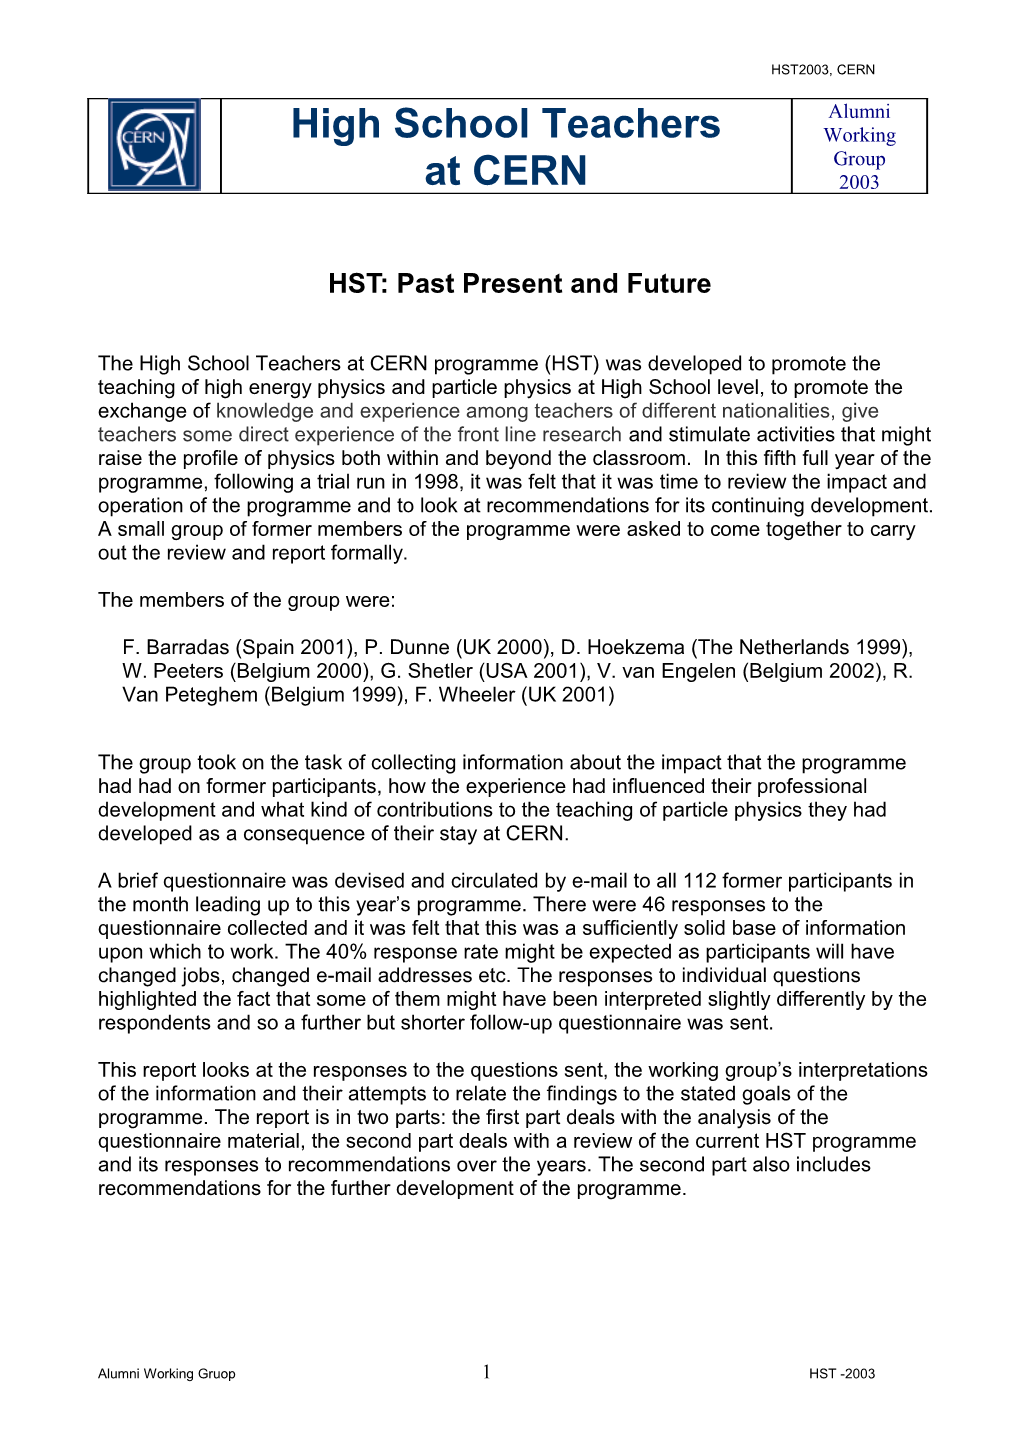 HST, Past and Future